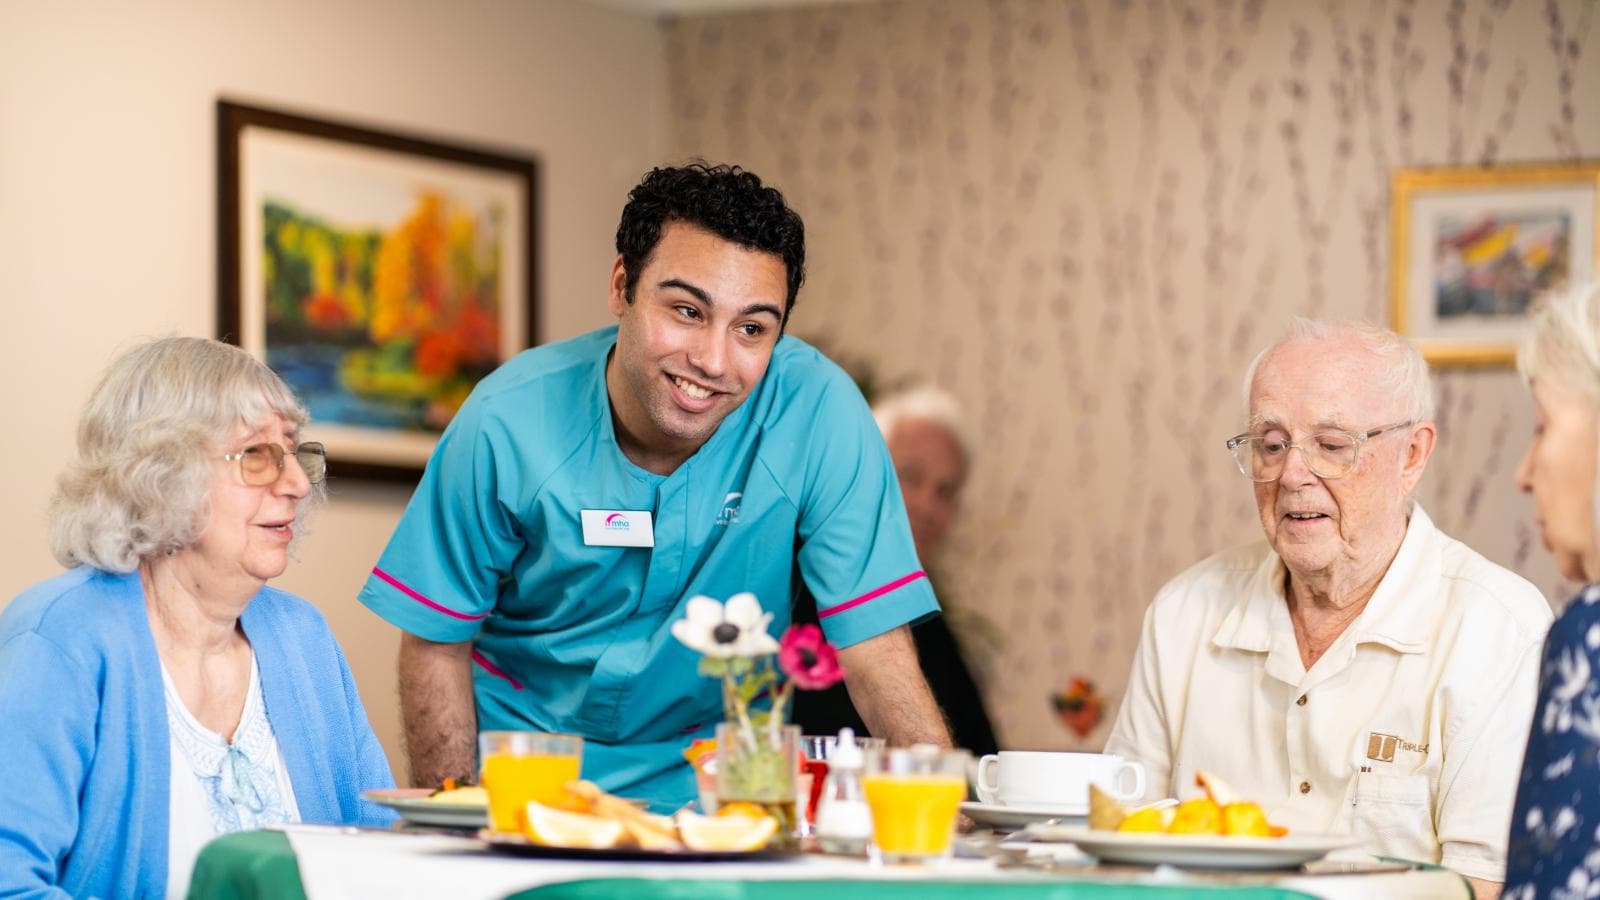 Male care assistant supporting care home residents during mealtime